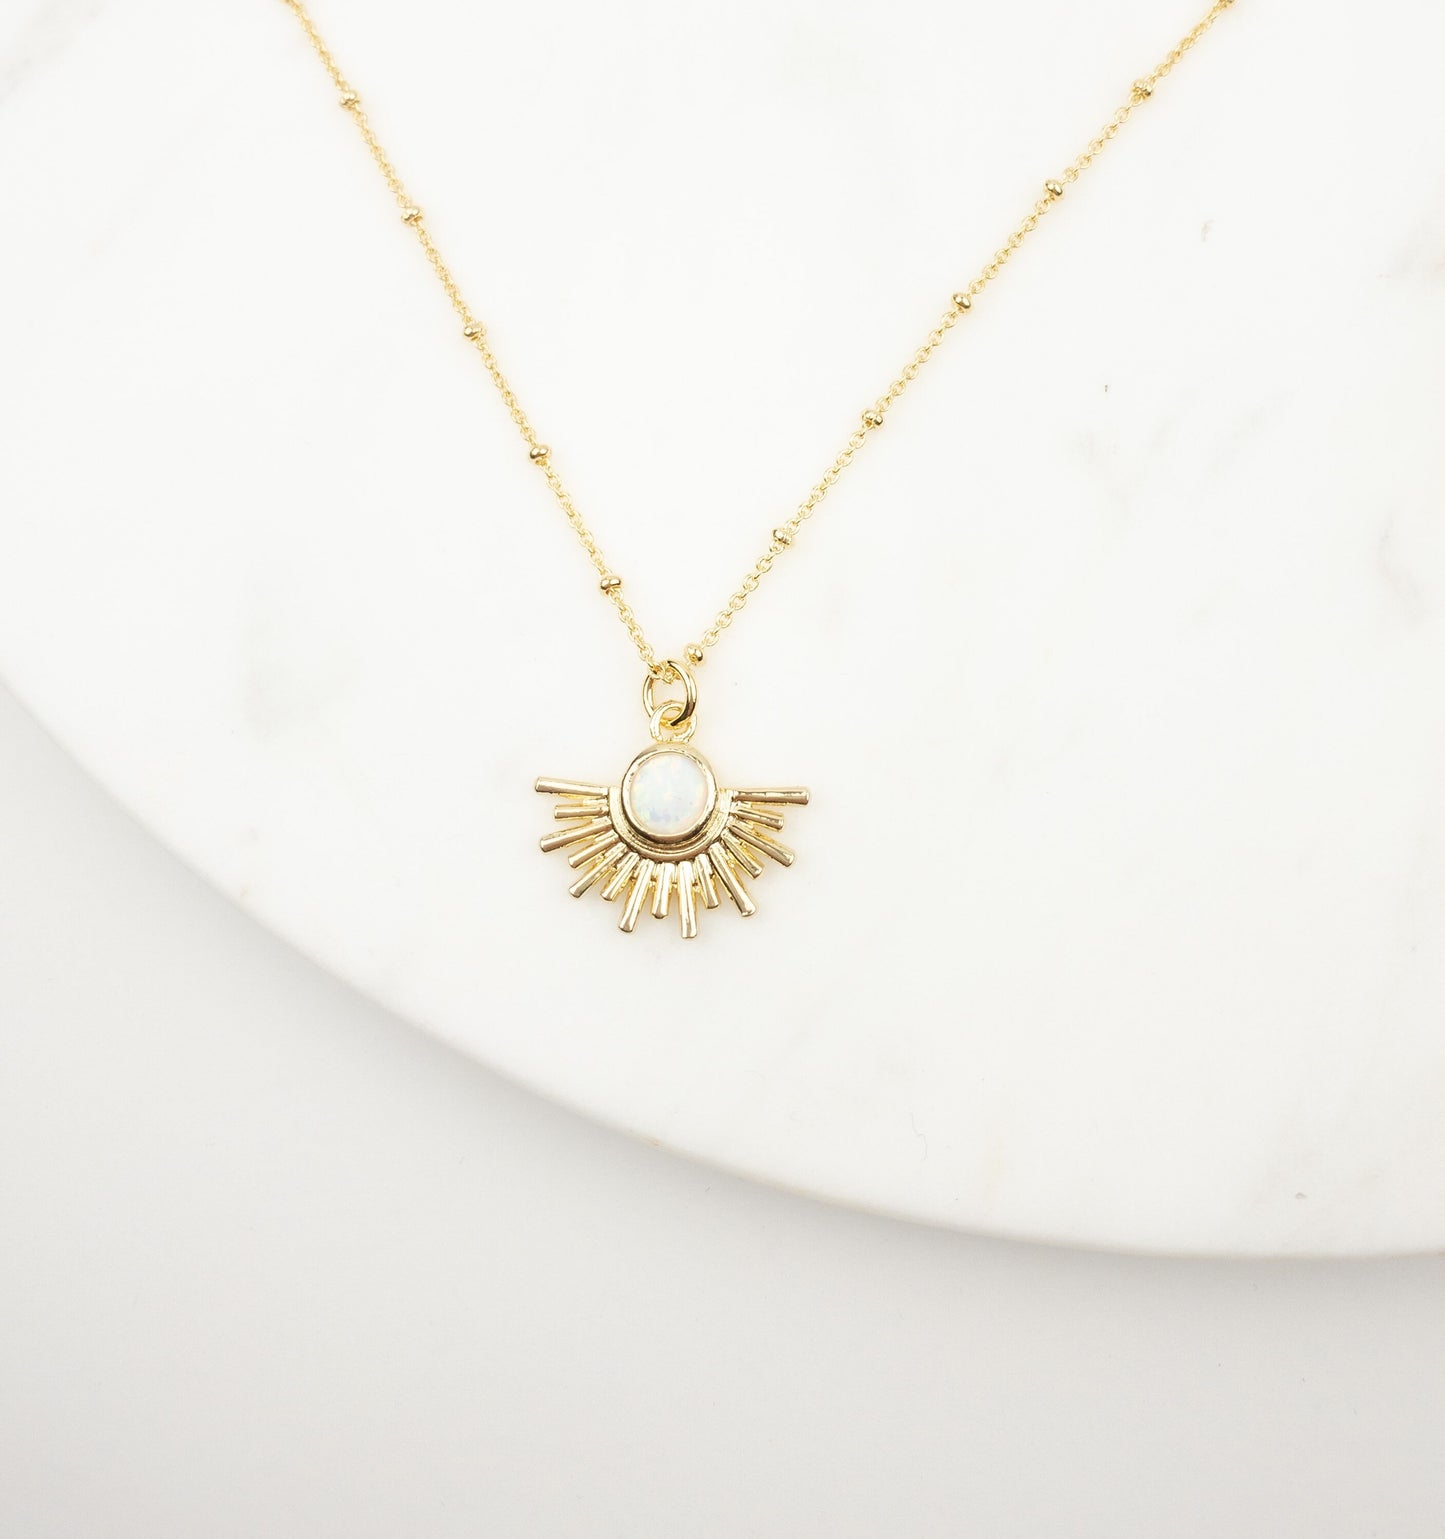 Sun necklace, celestial jewelry, Opal necklace, gold necklace, sun pendant necklace, birthday gifts for her, necklaces for women